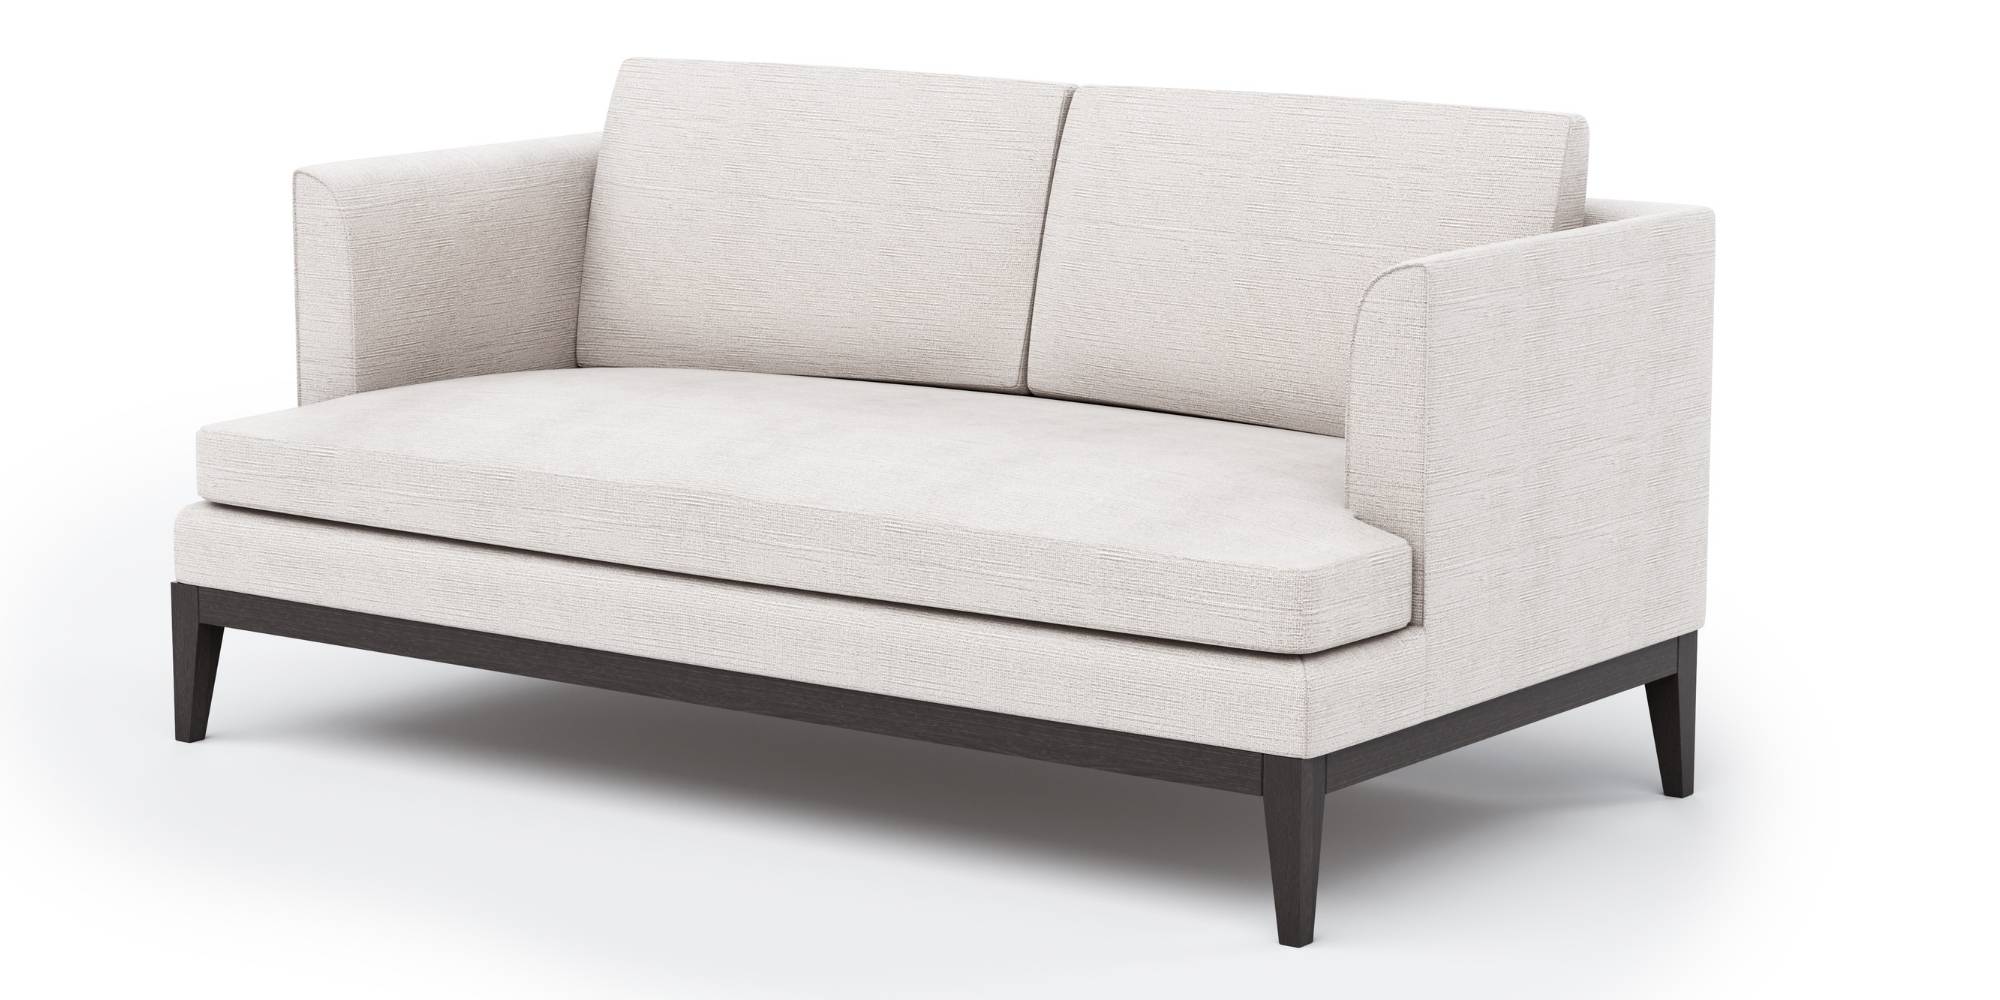 Porto Bench 3-4 seater in Outdoor Sofas for Porto collection